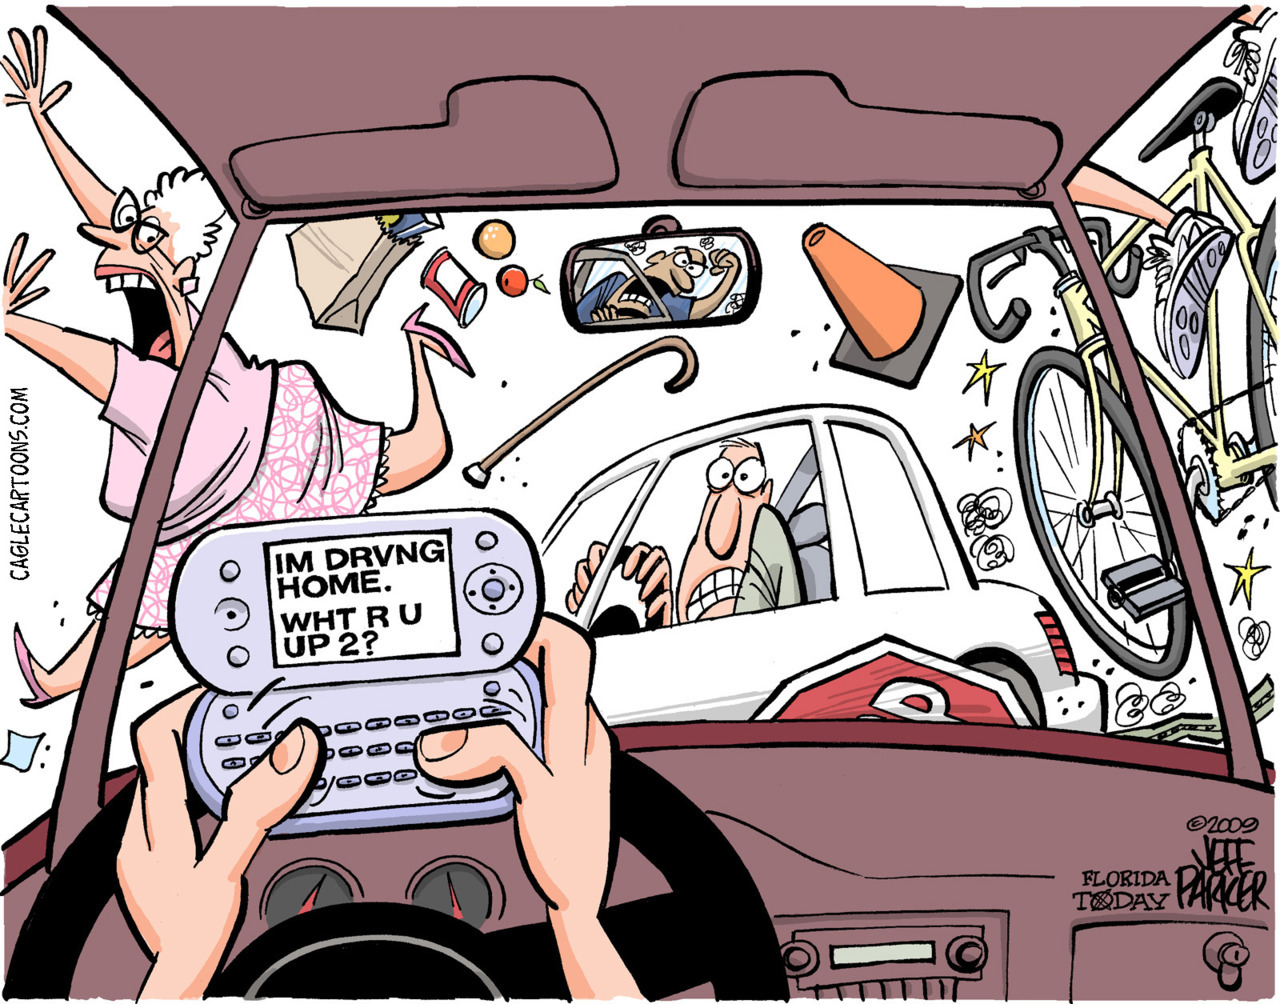 another cartoon to display how scary texting while driving can be ...